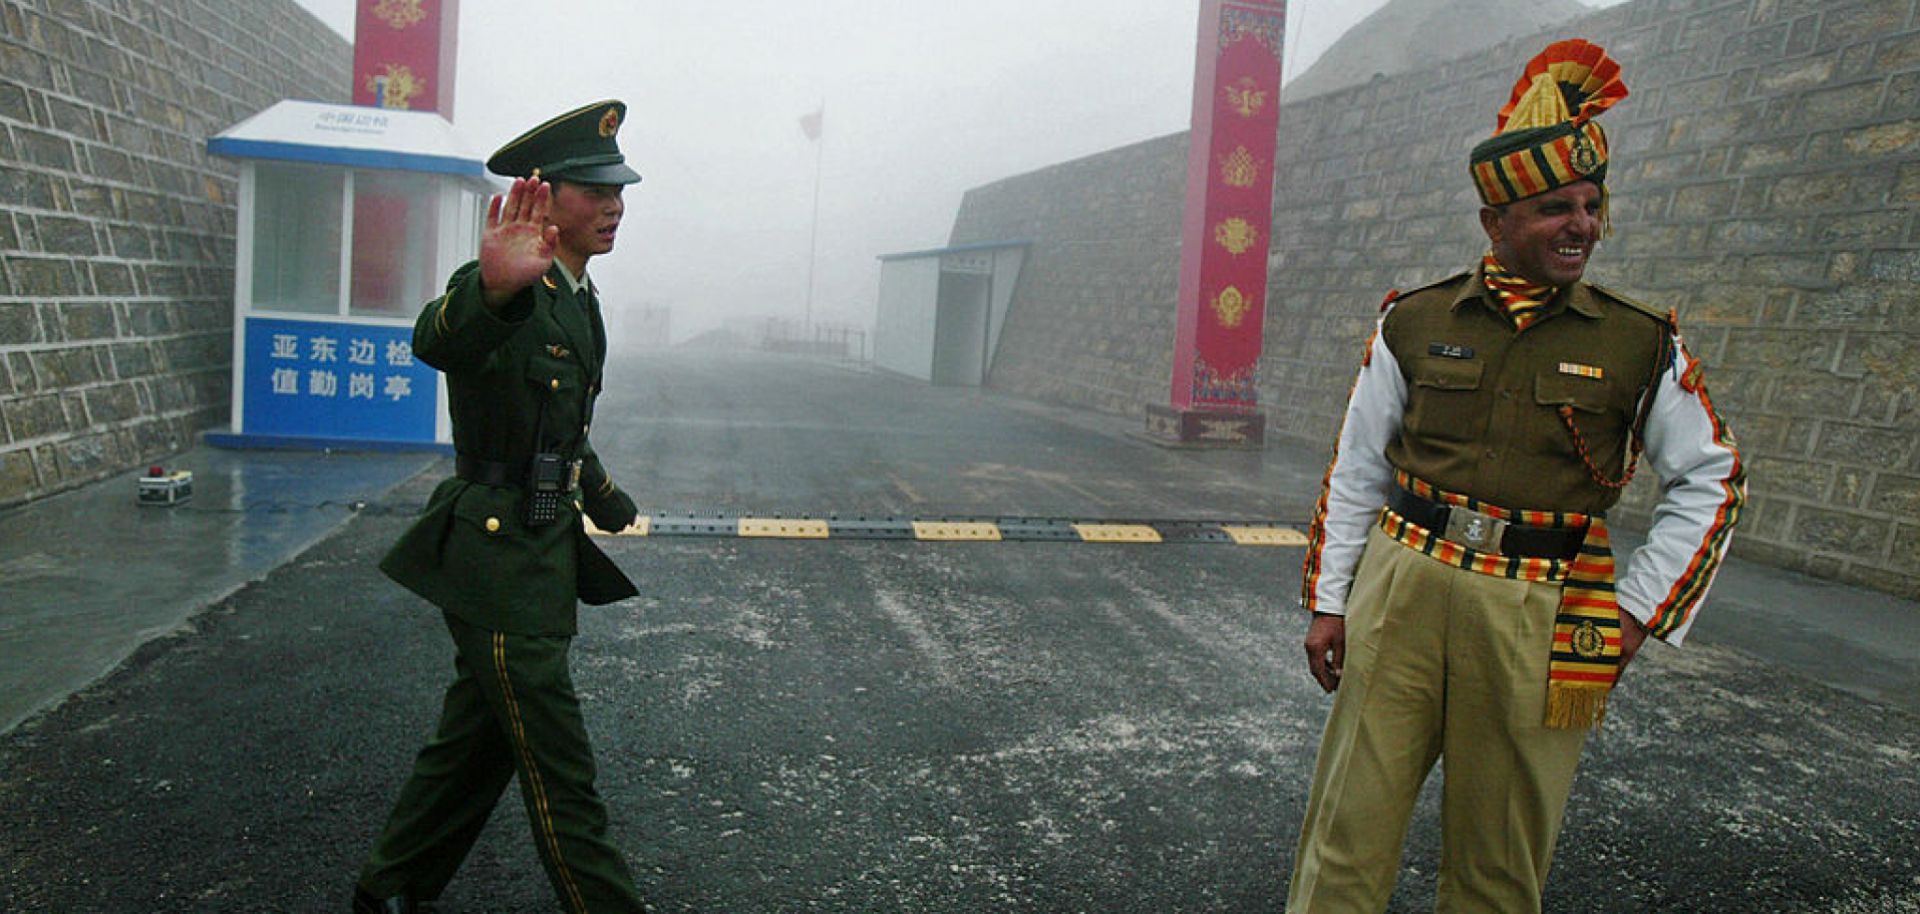 A Chinese soldier (L) and an Indian soldier (R) stand guard at the Chinese side of the ancient Nathu La border crossing between India and China.